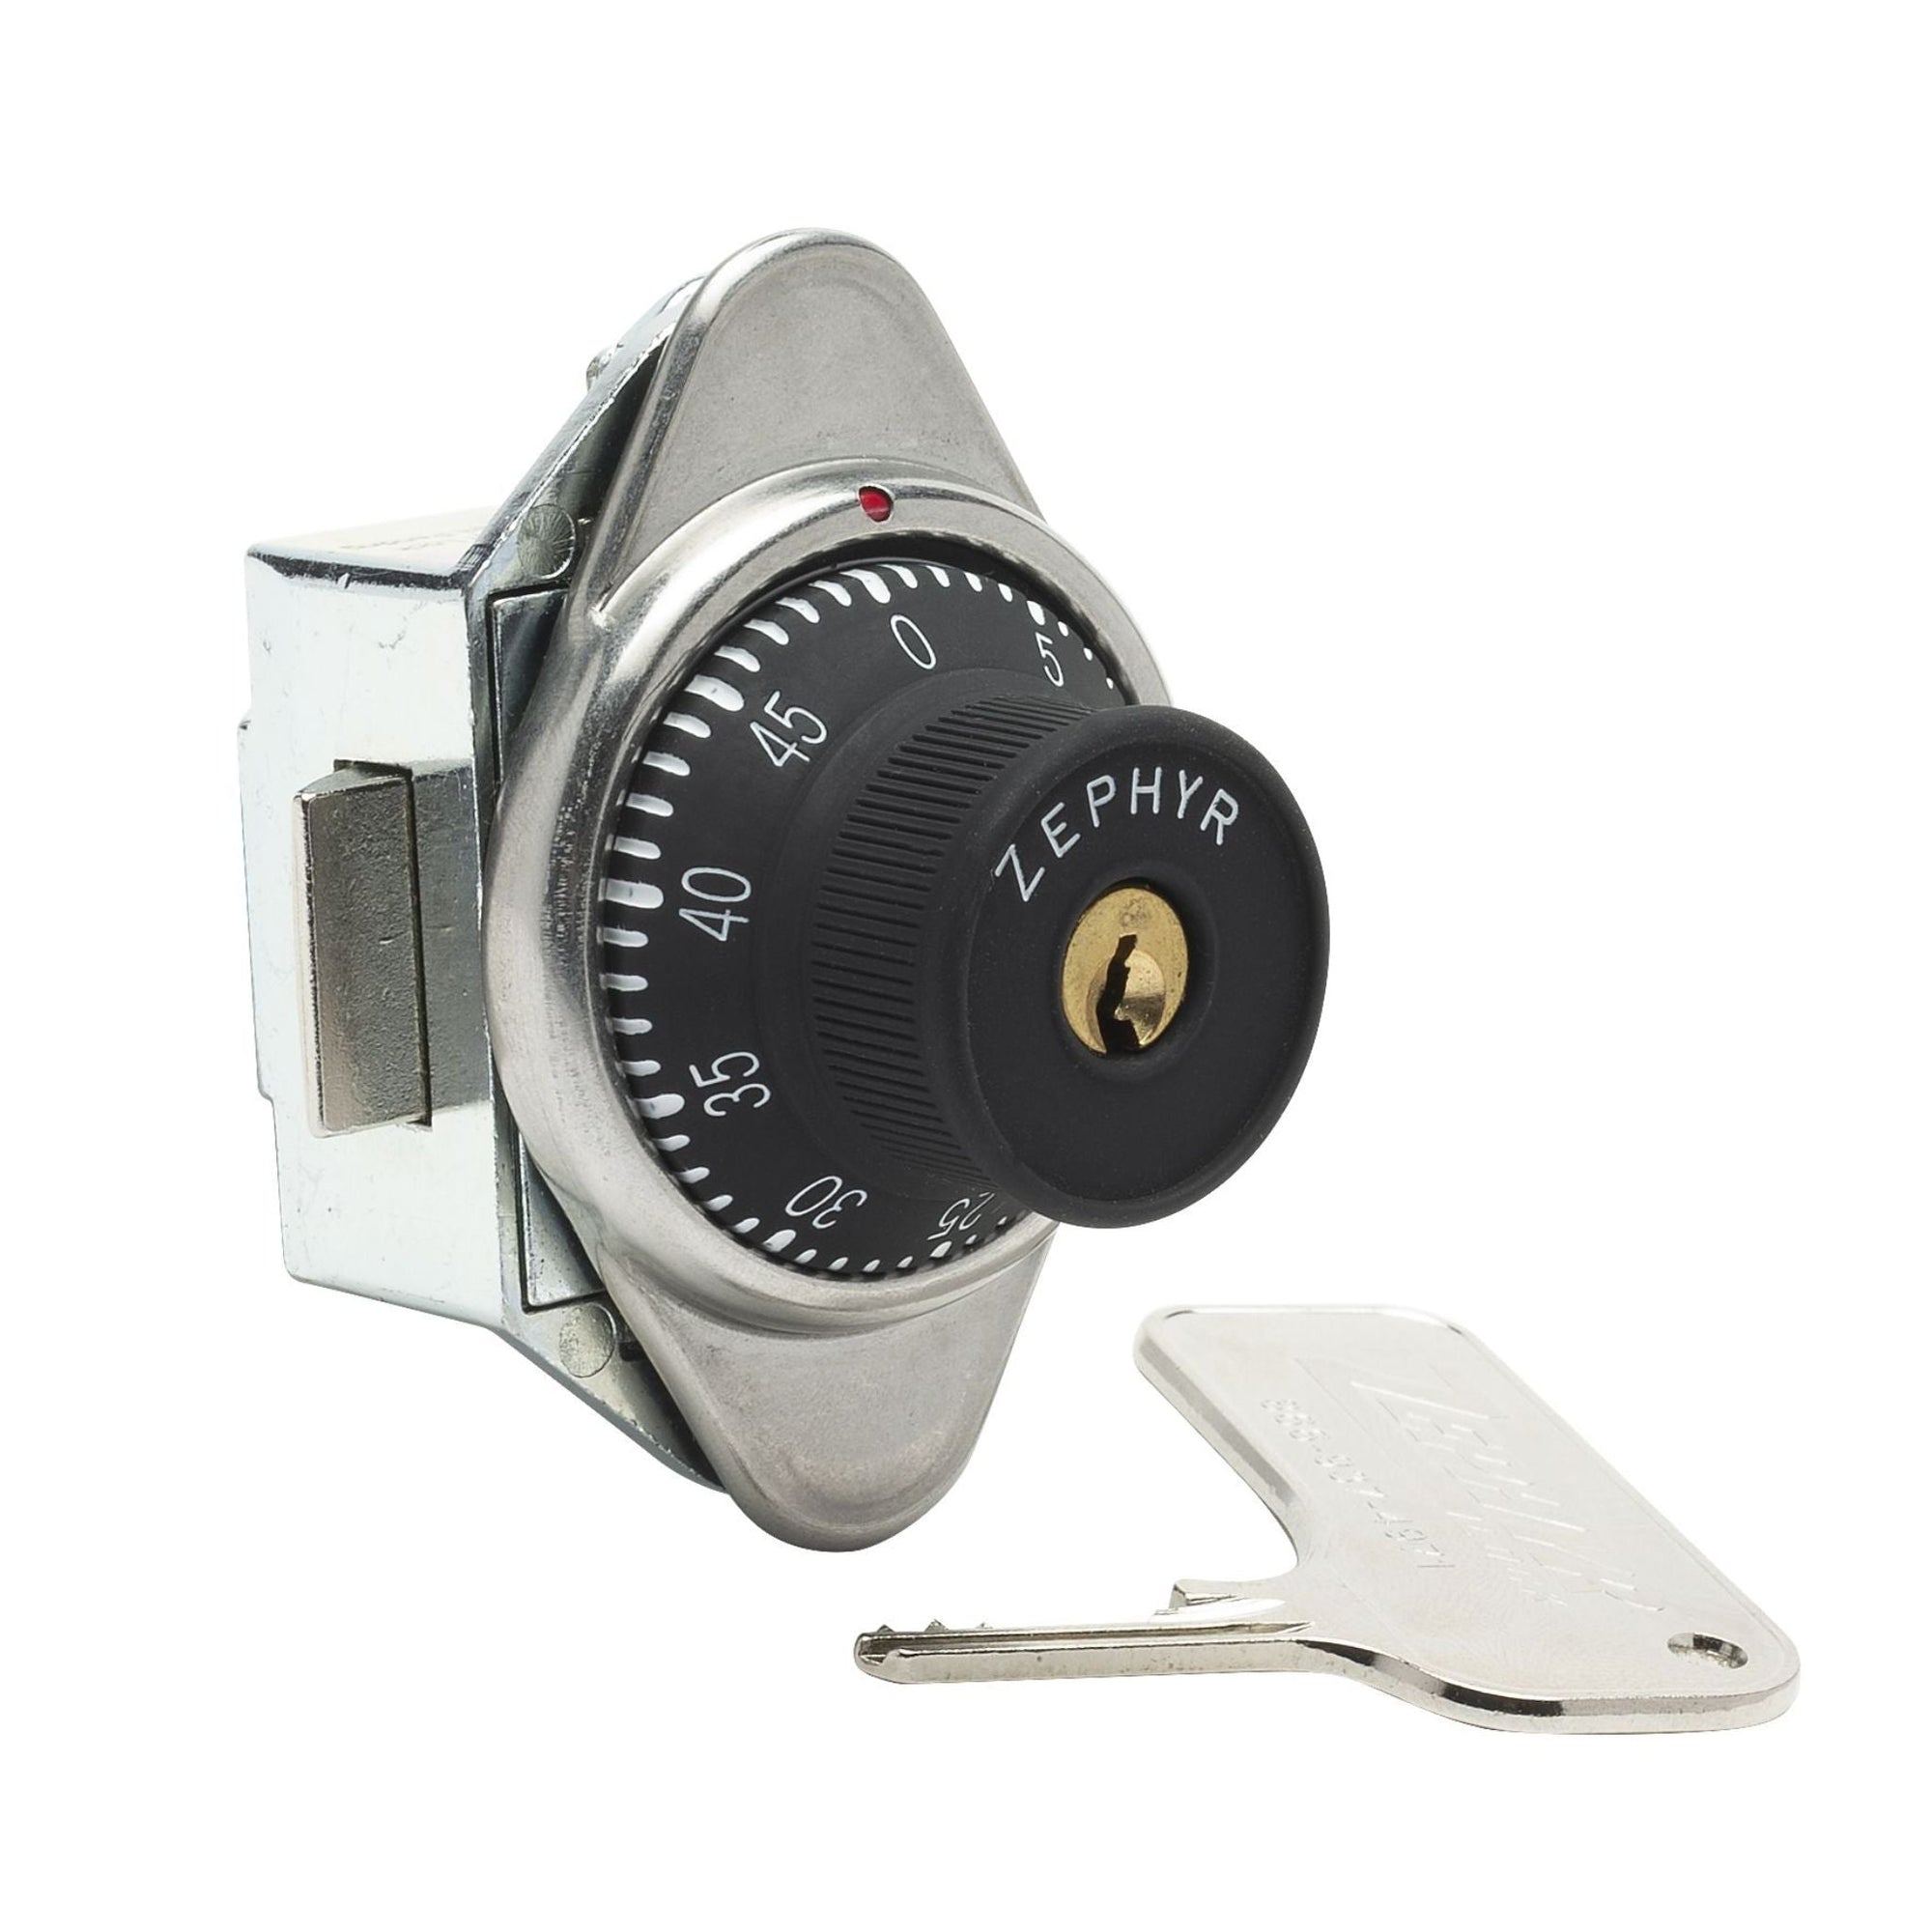 Zephyr 1954ADA RH ADA-Compliant Built-In Combination Locker Locks With Key Control Override for Supervisory Access - The Lock Source